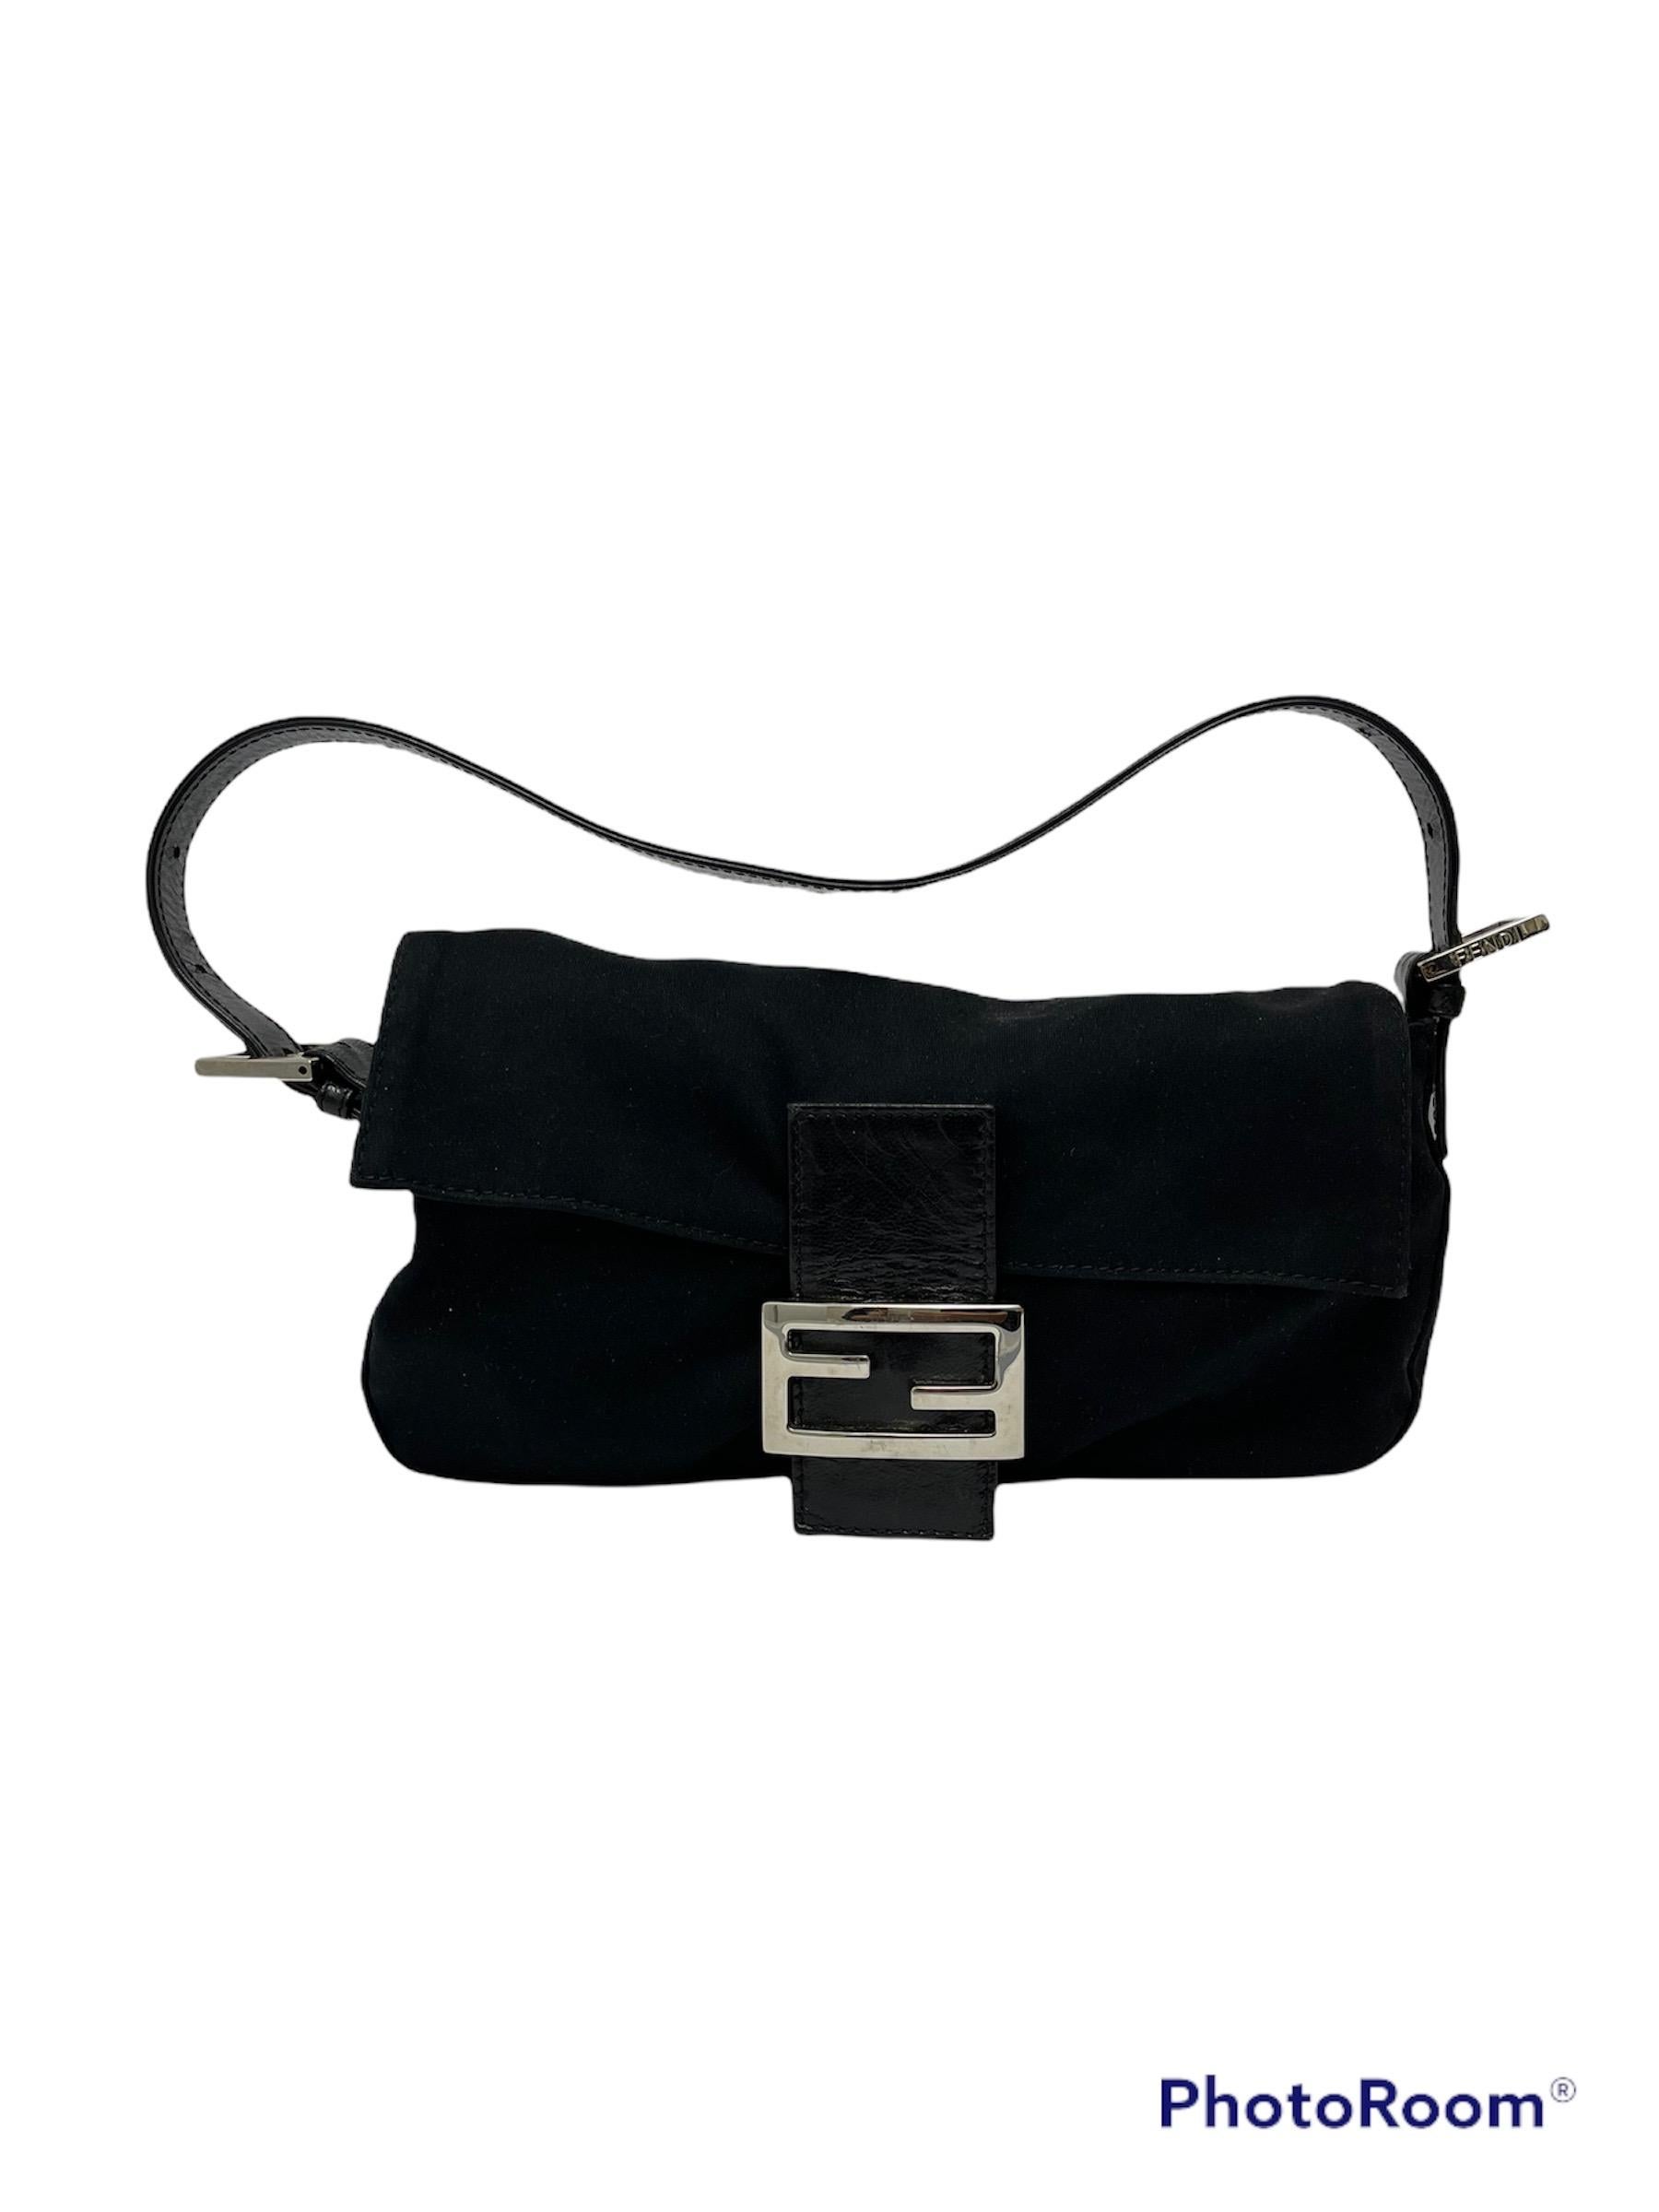 Fendi baguette in soft black fabric with silver leather and hardware.  Adjustable leather handle.  Front flap with magnetic button closure, black interior with side zip pocket.  Condition of the bag in excellent condition, as can be seen in the